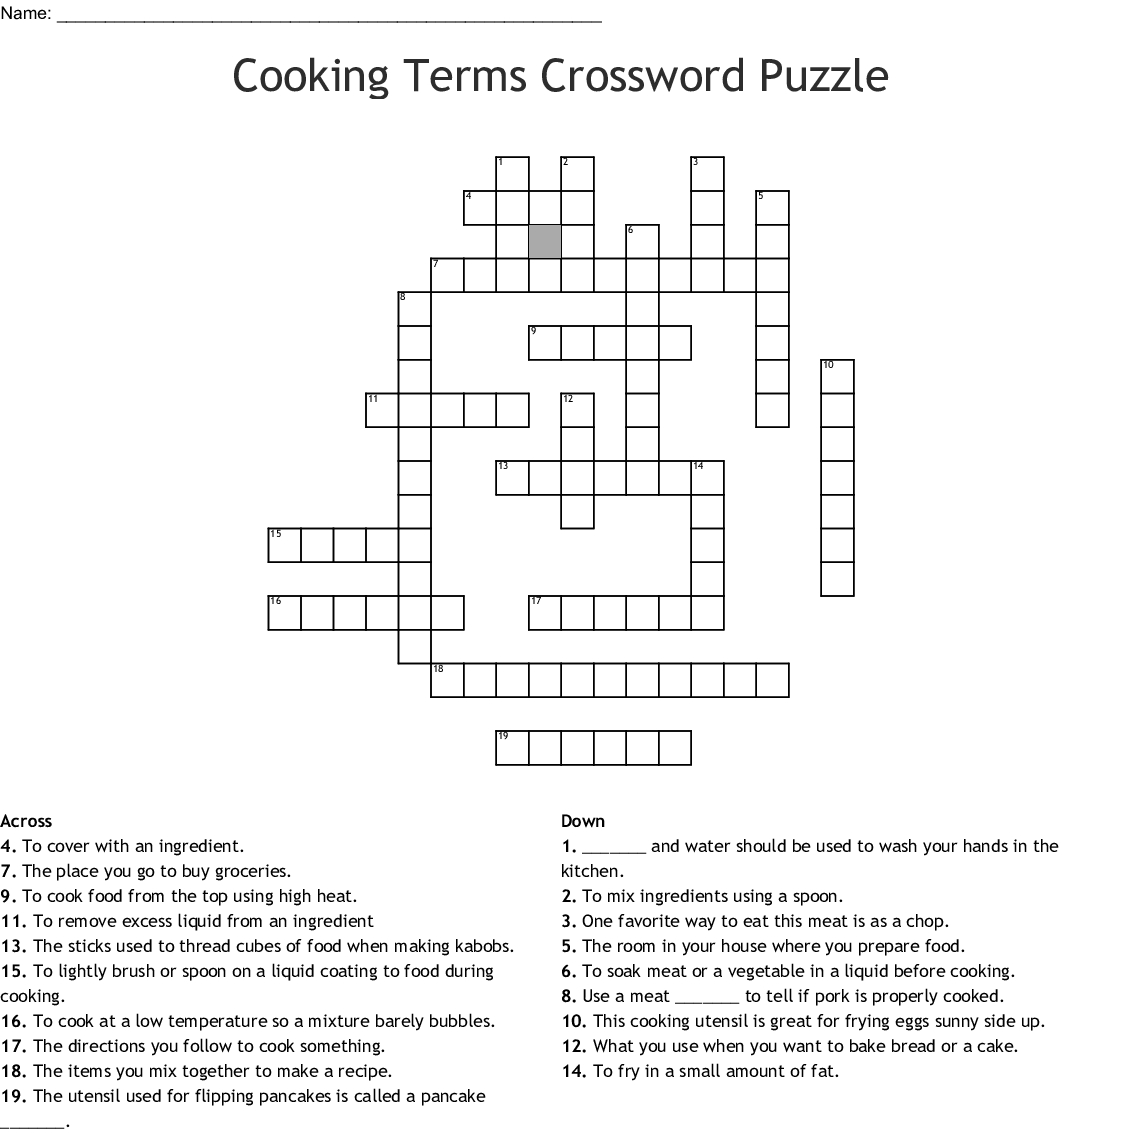 Cooking Terms Crossword Puzzle Word db excel com